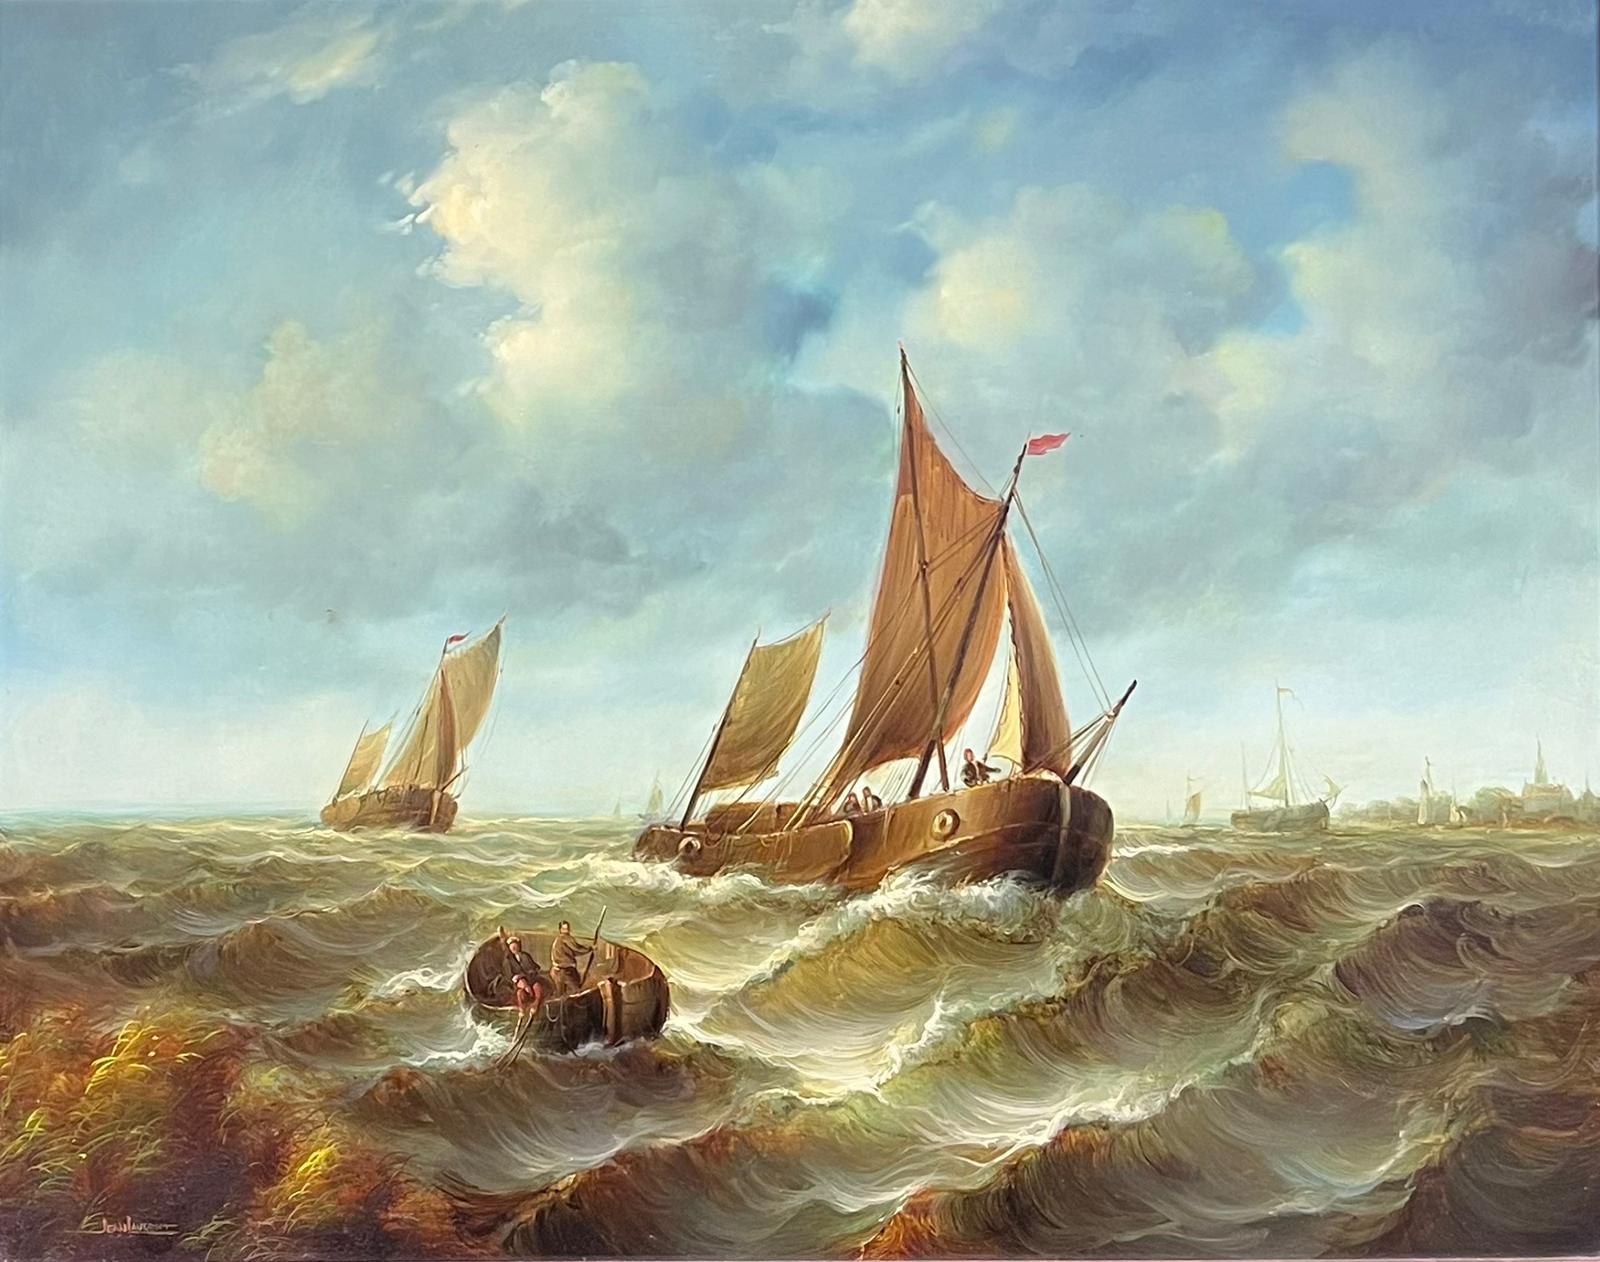 Sailing on Choppy Seas
by Jean Laurent (French 1898-1988)
signed oil on board, framed
framed: 22.5 x 27 inches
board: 18 x 21 inches
provenance: private collection, UK
condition: overall very good and sound condition 